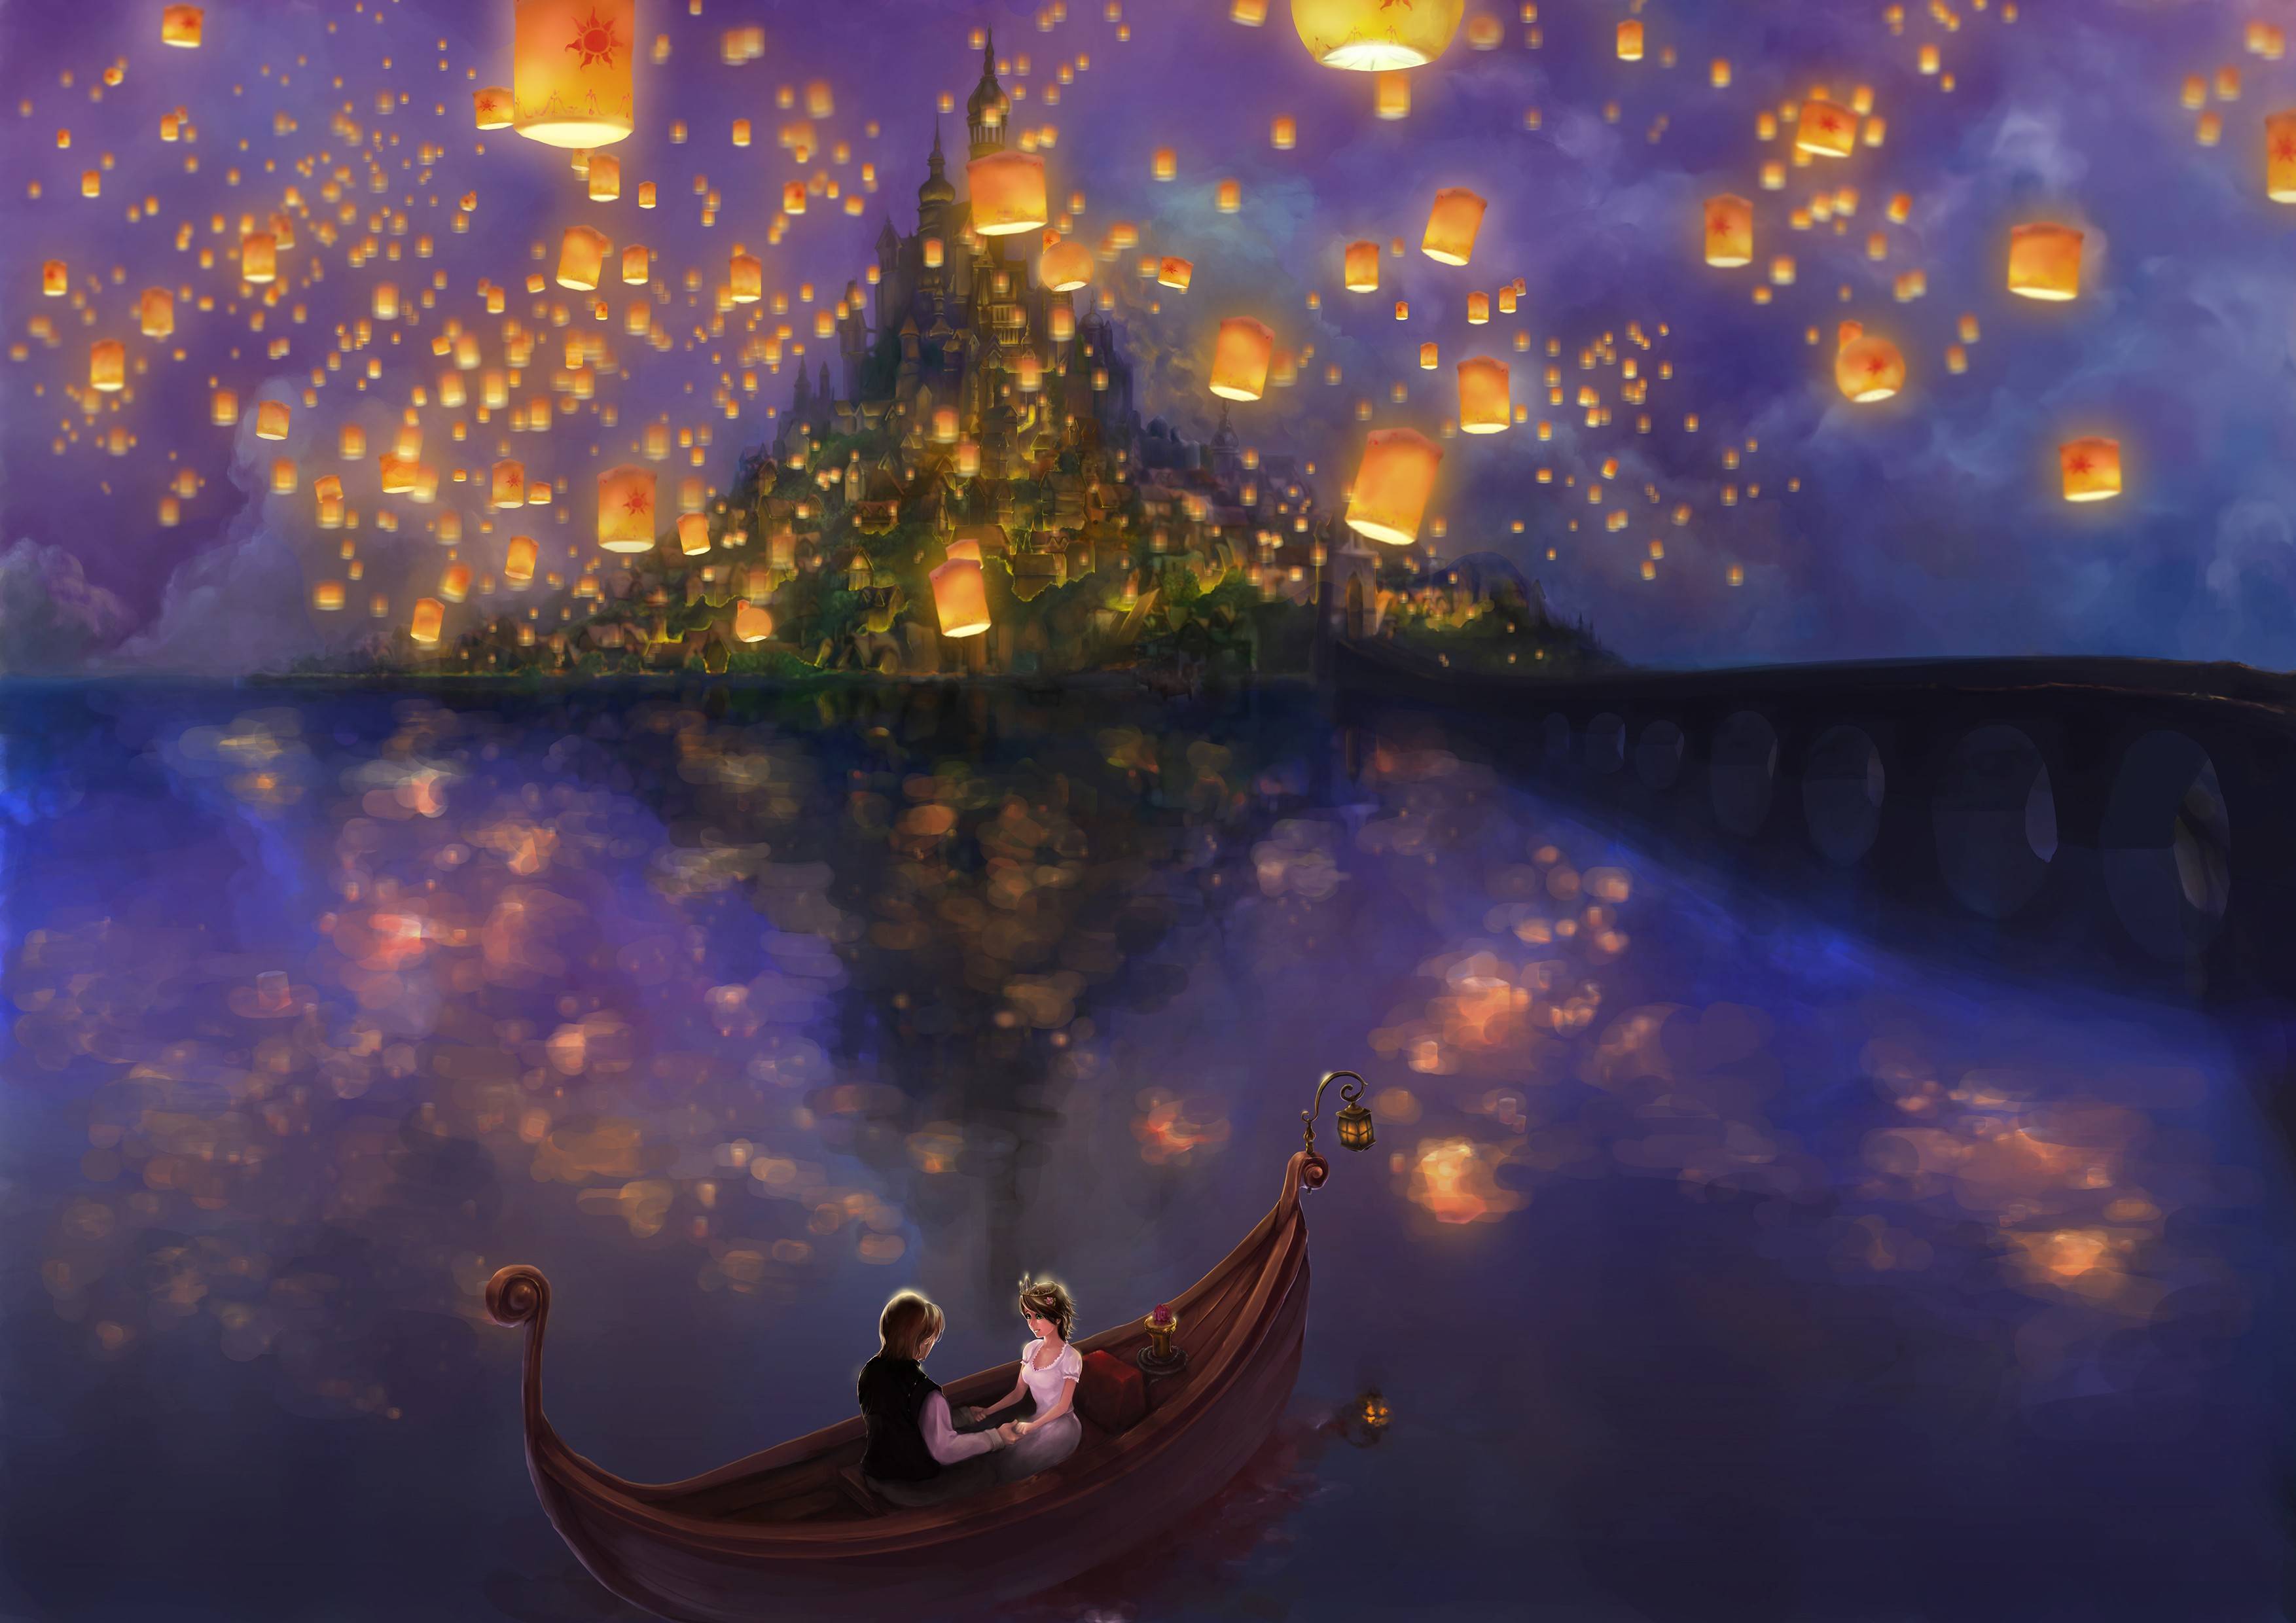 Tangled HD Wallpaper Background For Free Download, B.SCB